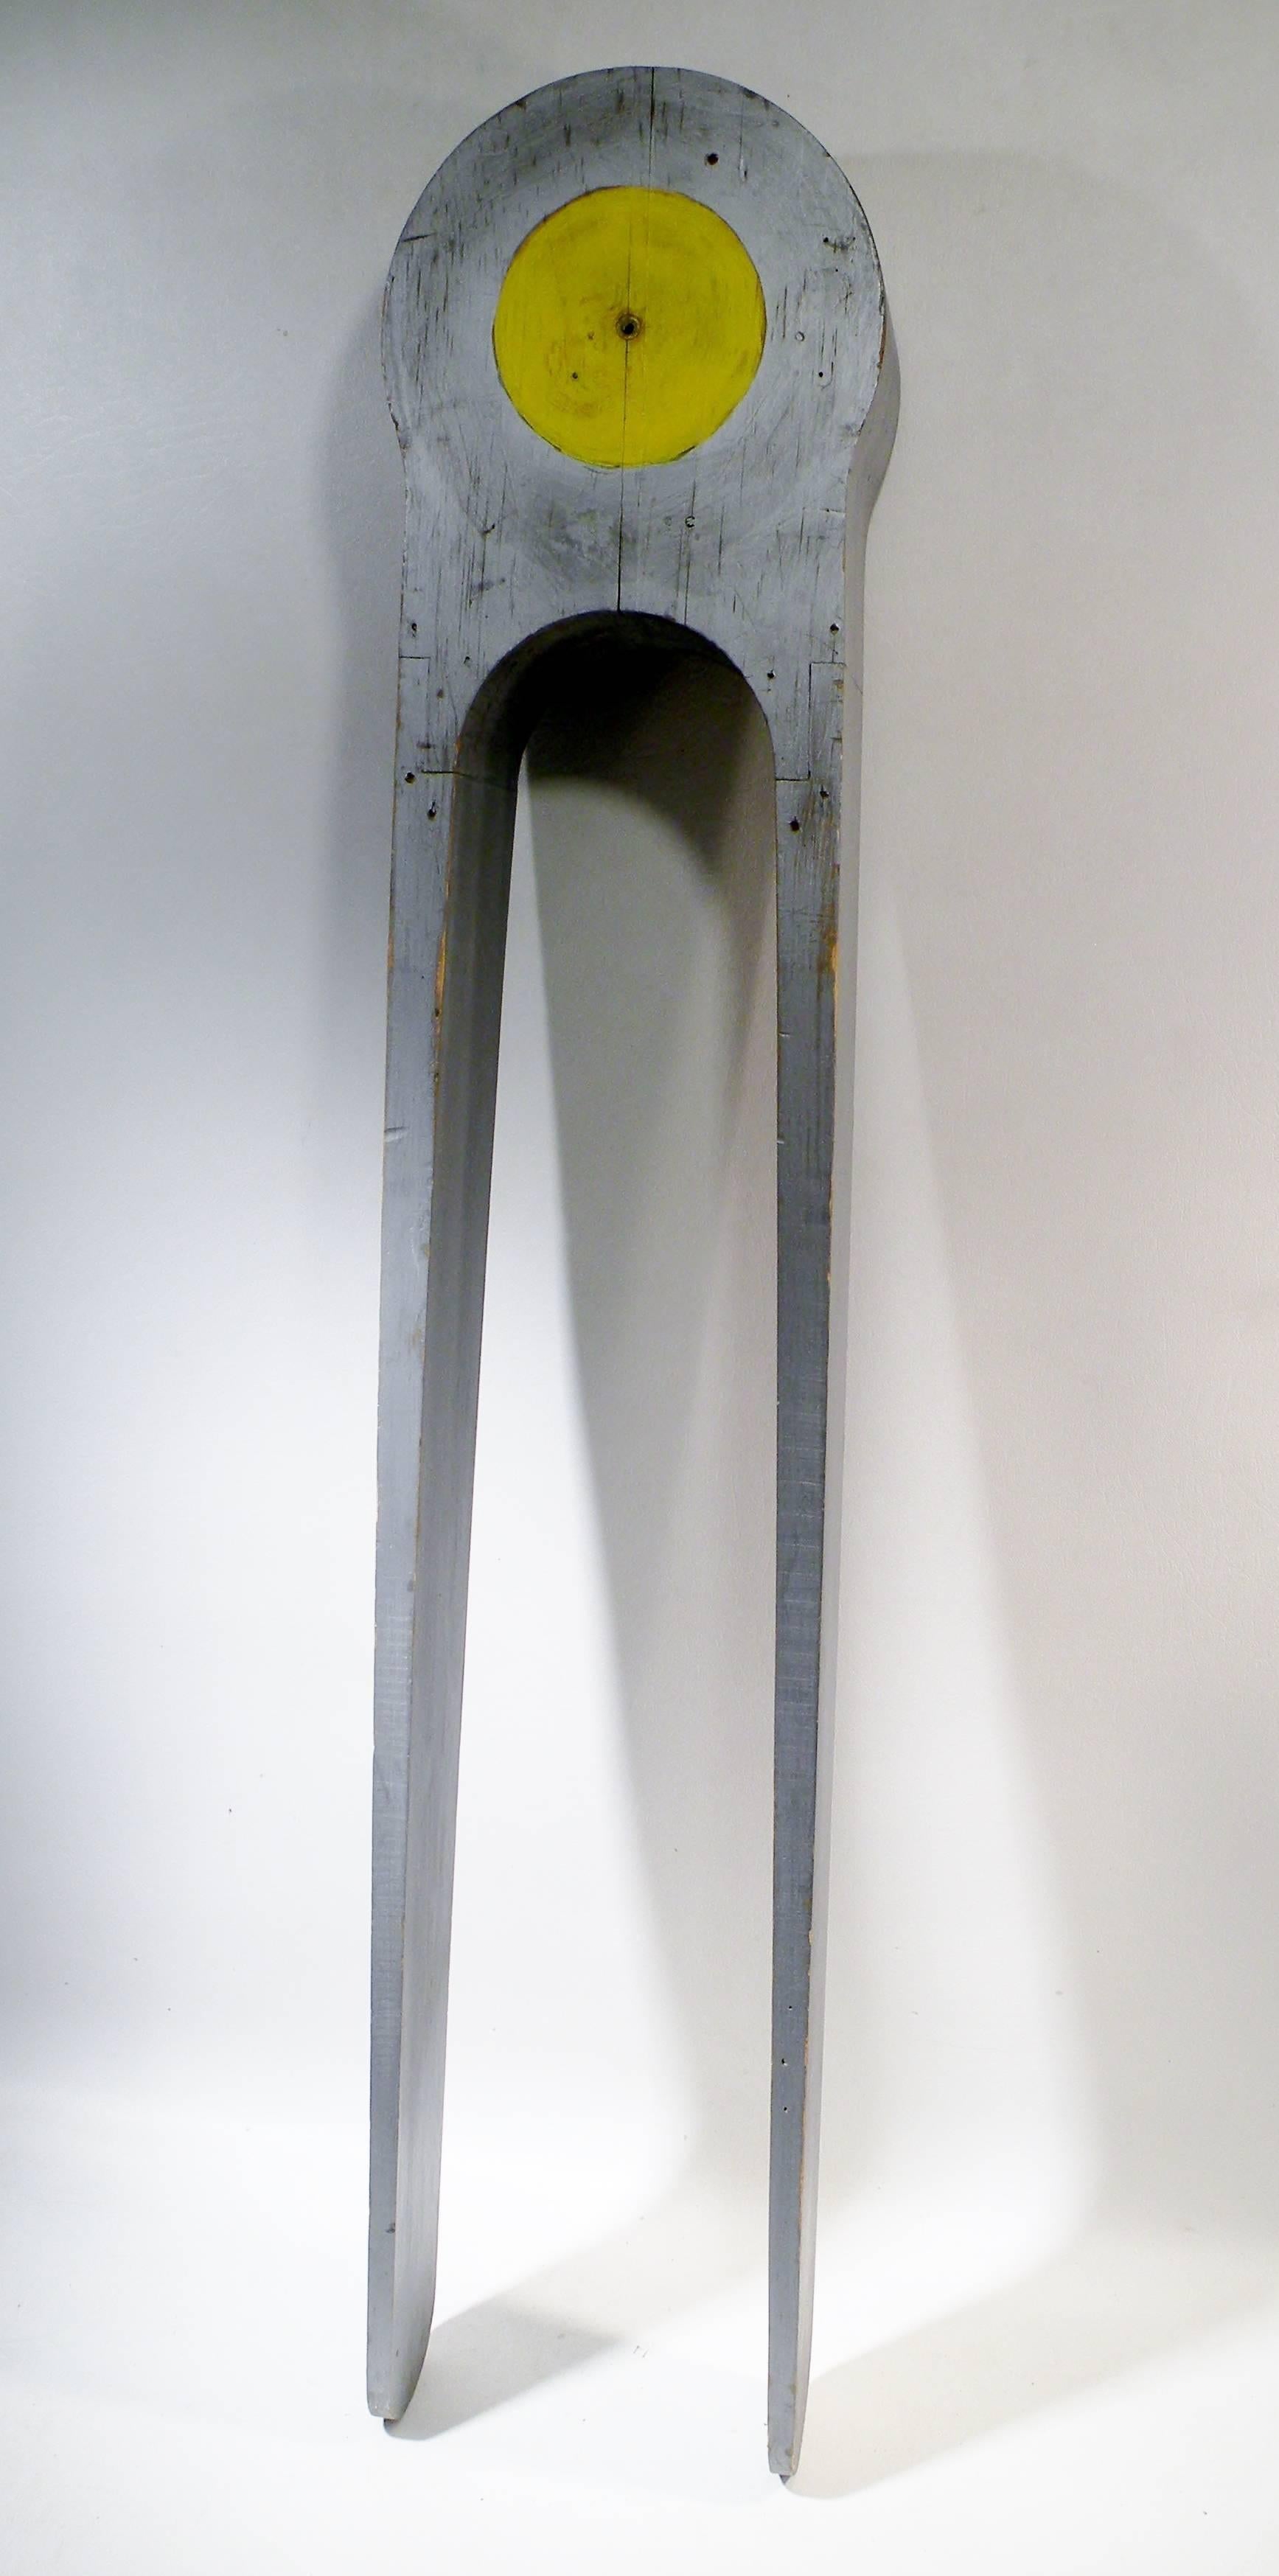 Sculptural 1940s era handmade 3D Folk Art oversize tool or clothespin trade sign. Constructed of wood with matching silver and yellow painted surfaces to both sides. As found with warm patinated surface showing honest surface loss. Measures: Total